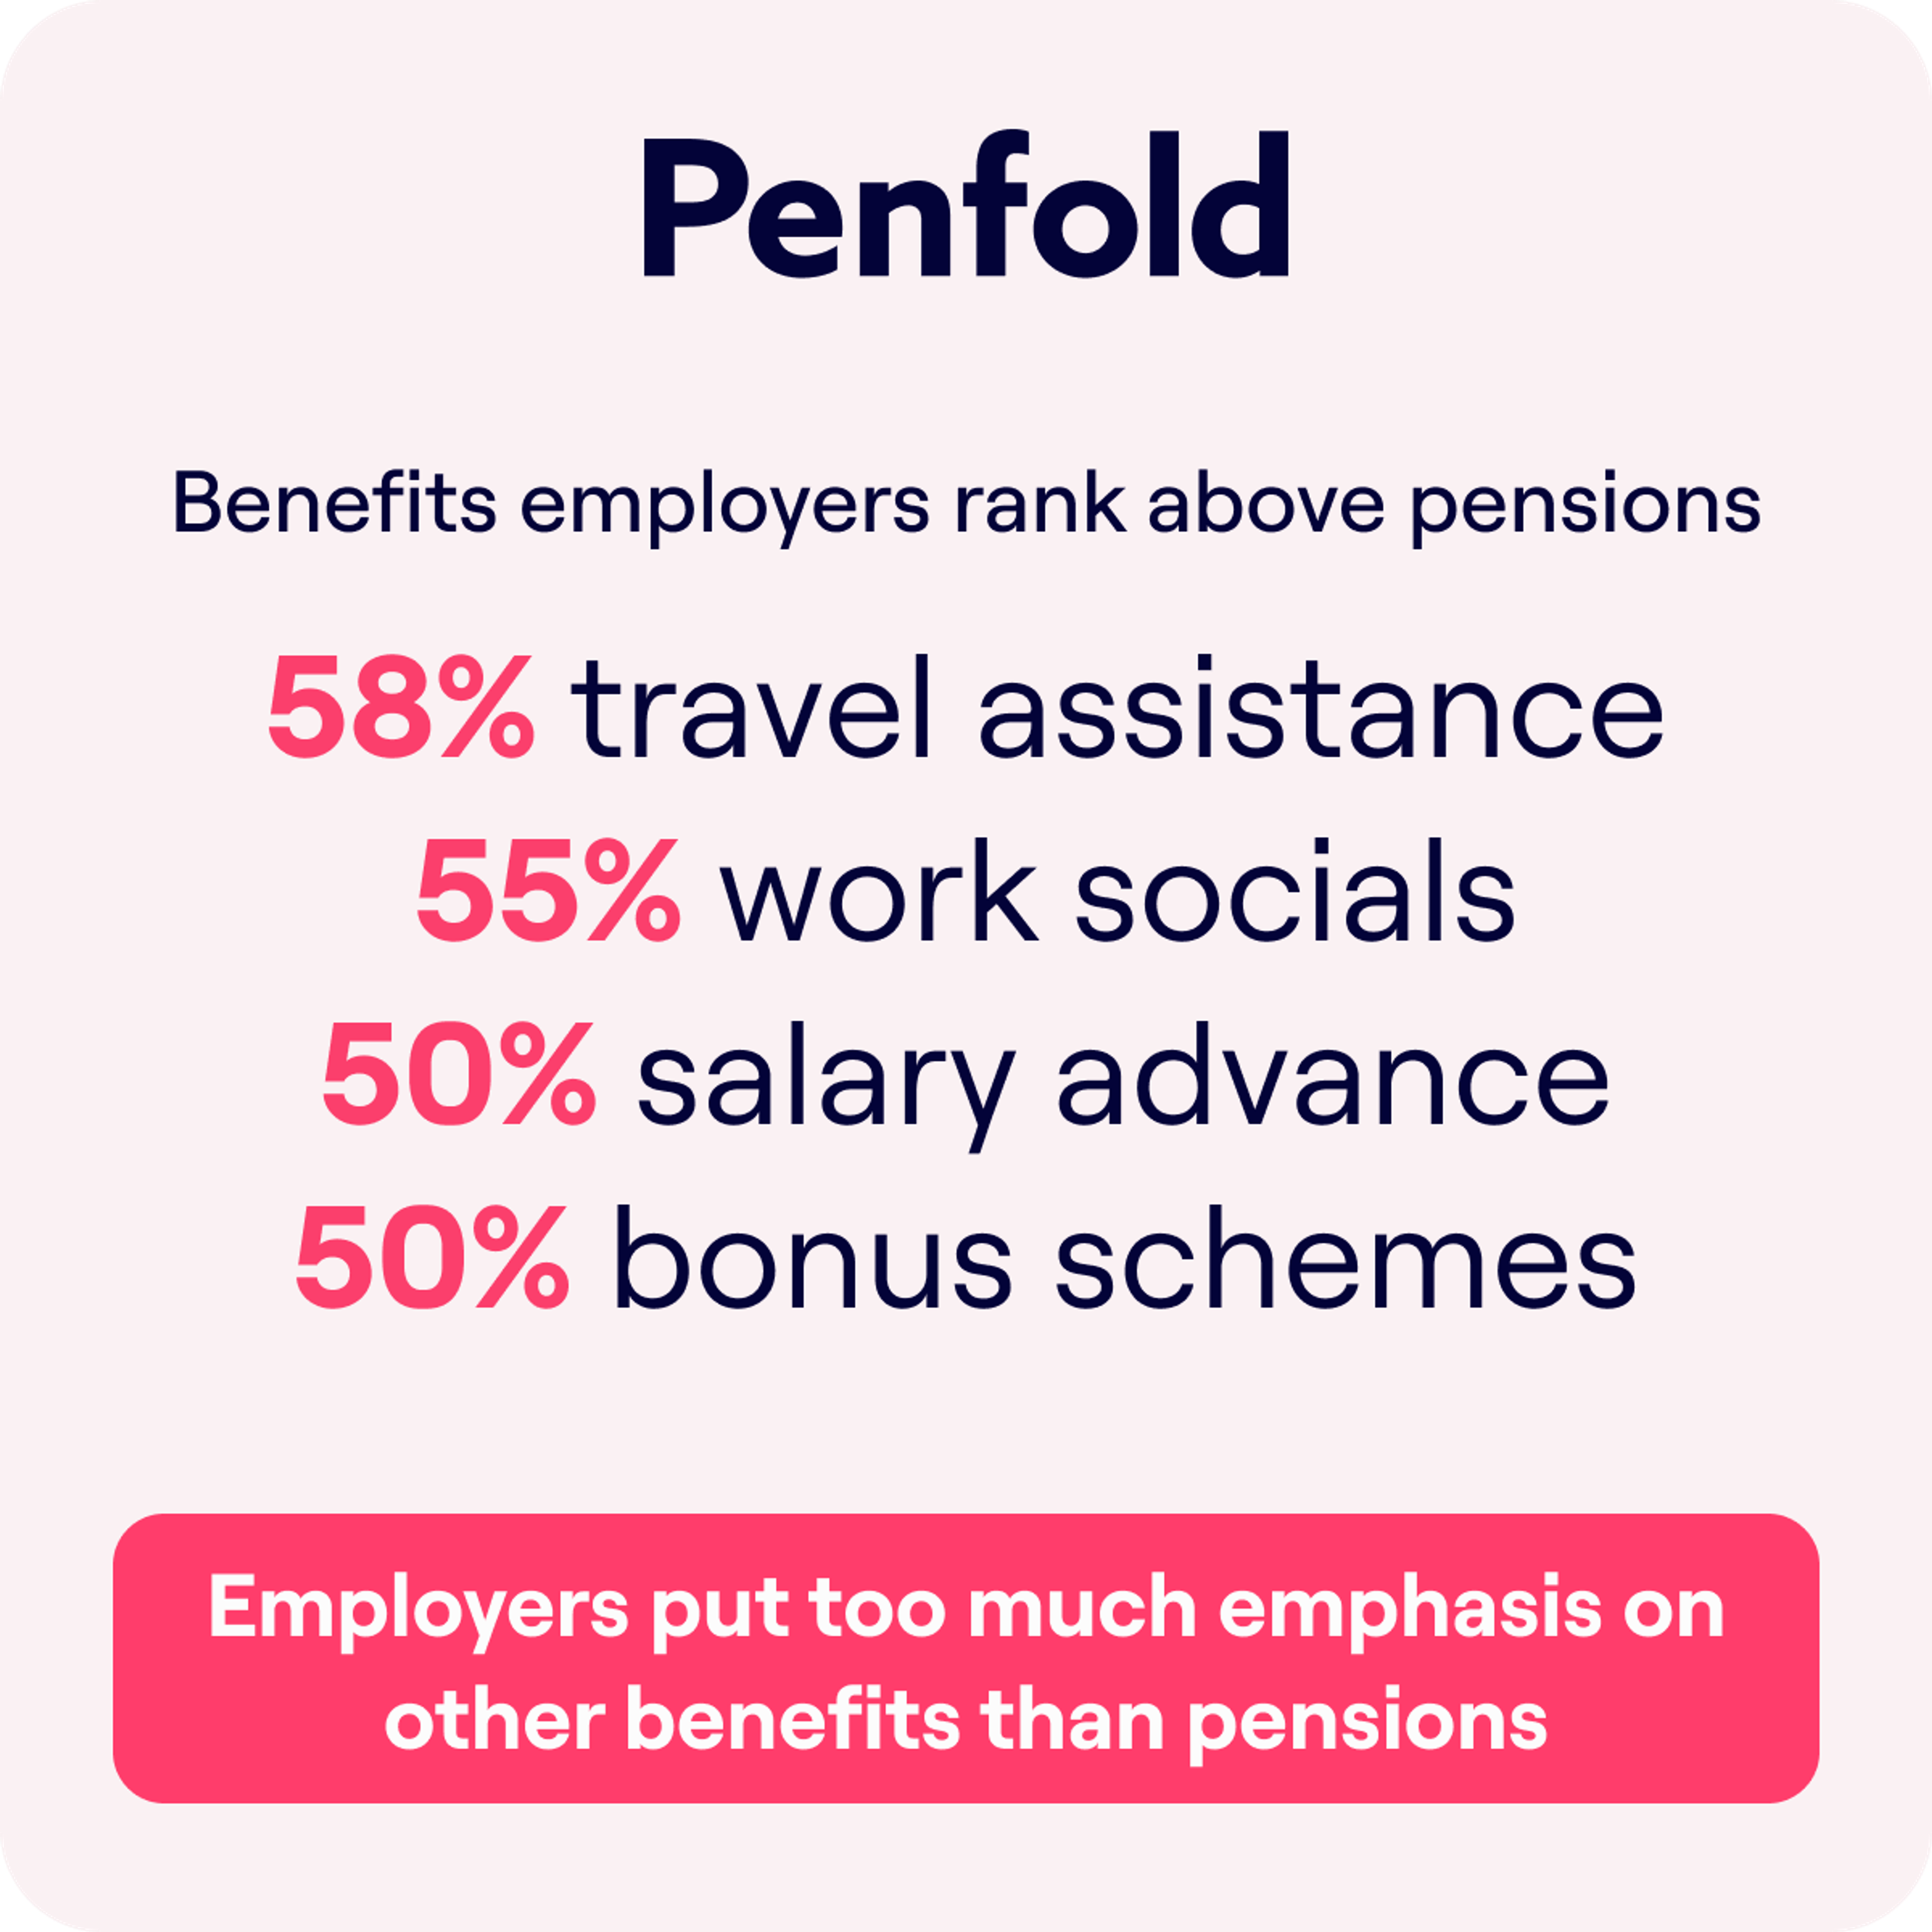 A Penfold infographic listing benefits employers rank above pensions: "58% travel assistance," "55% work socials," and "50% salary advance and bonus schemes." The percentages are highlighted in pink, with a concluding statement in a red box at the bottom, "Employers put too much emphasis on other benefits than pensions," suggesting a reevaluation of benefits prioritization may be needed.